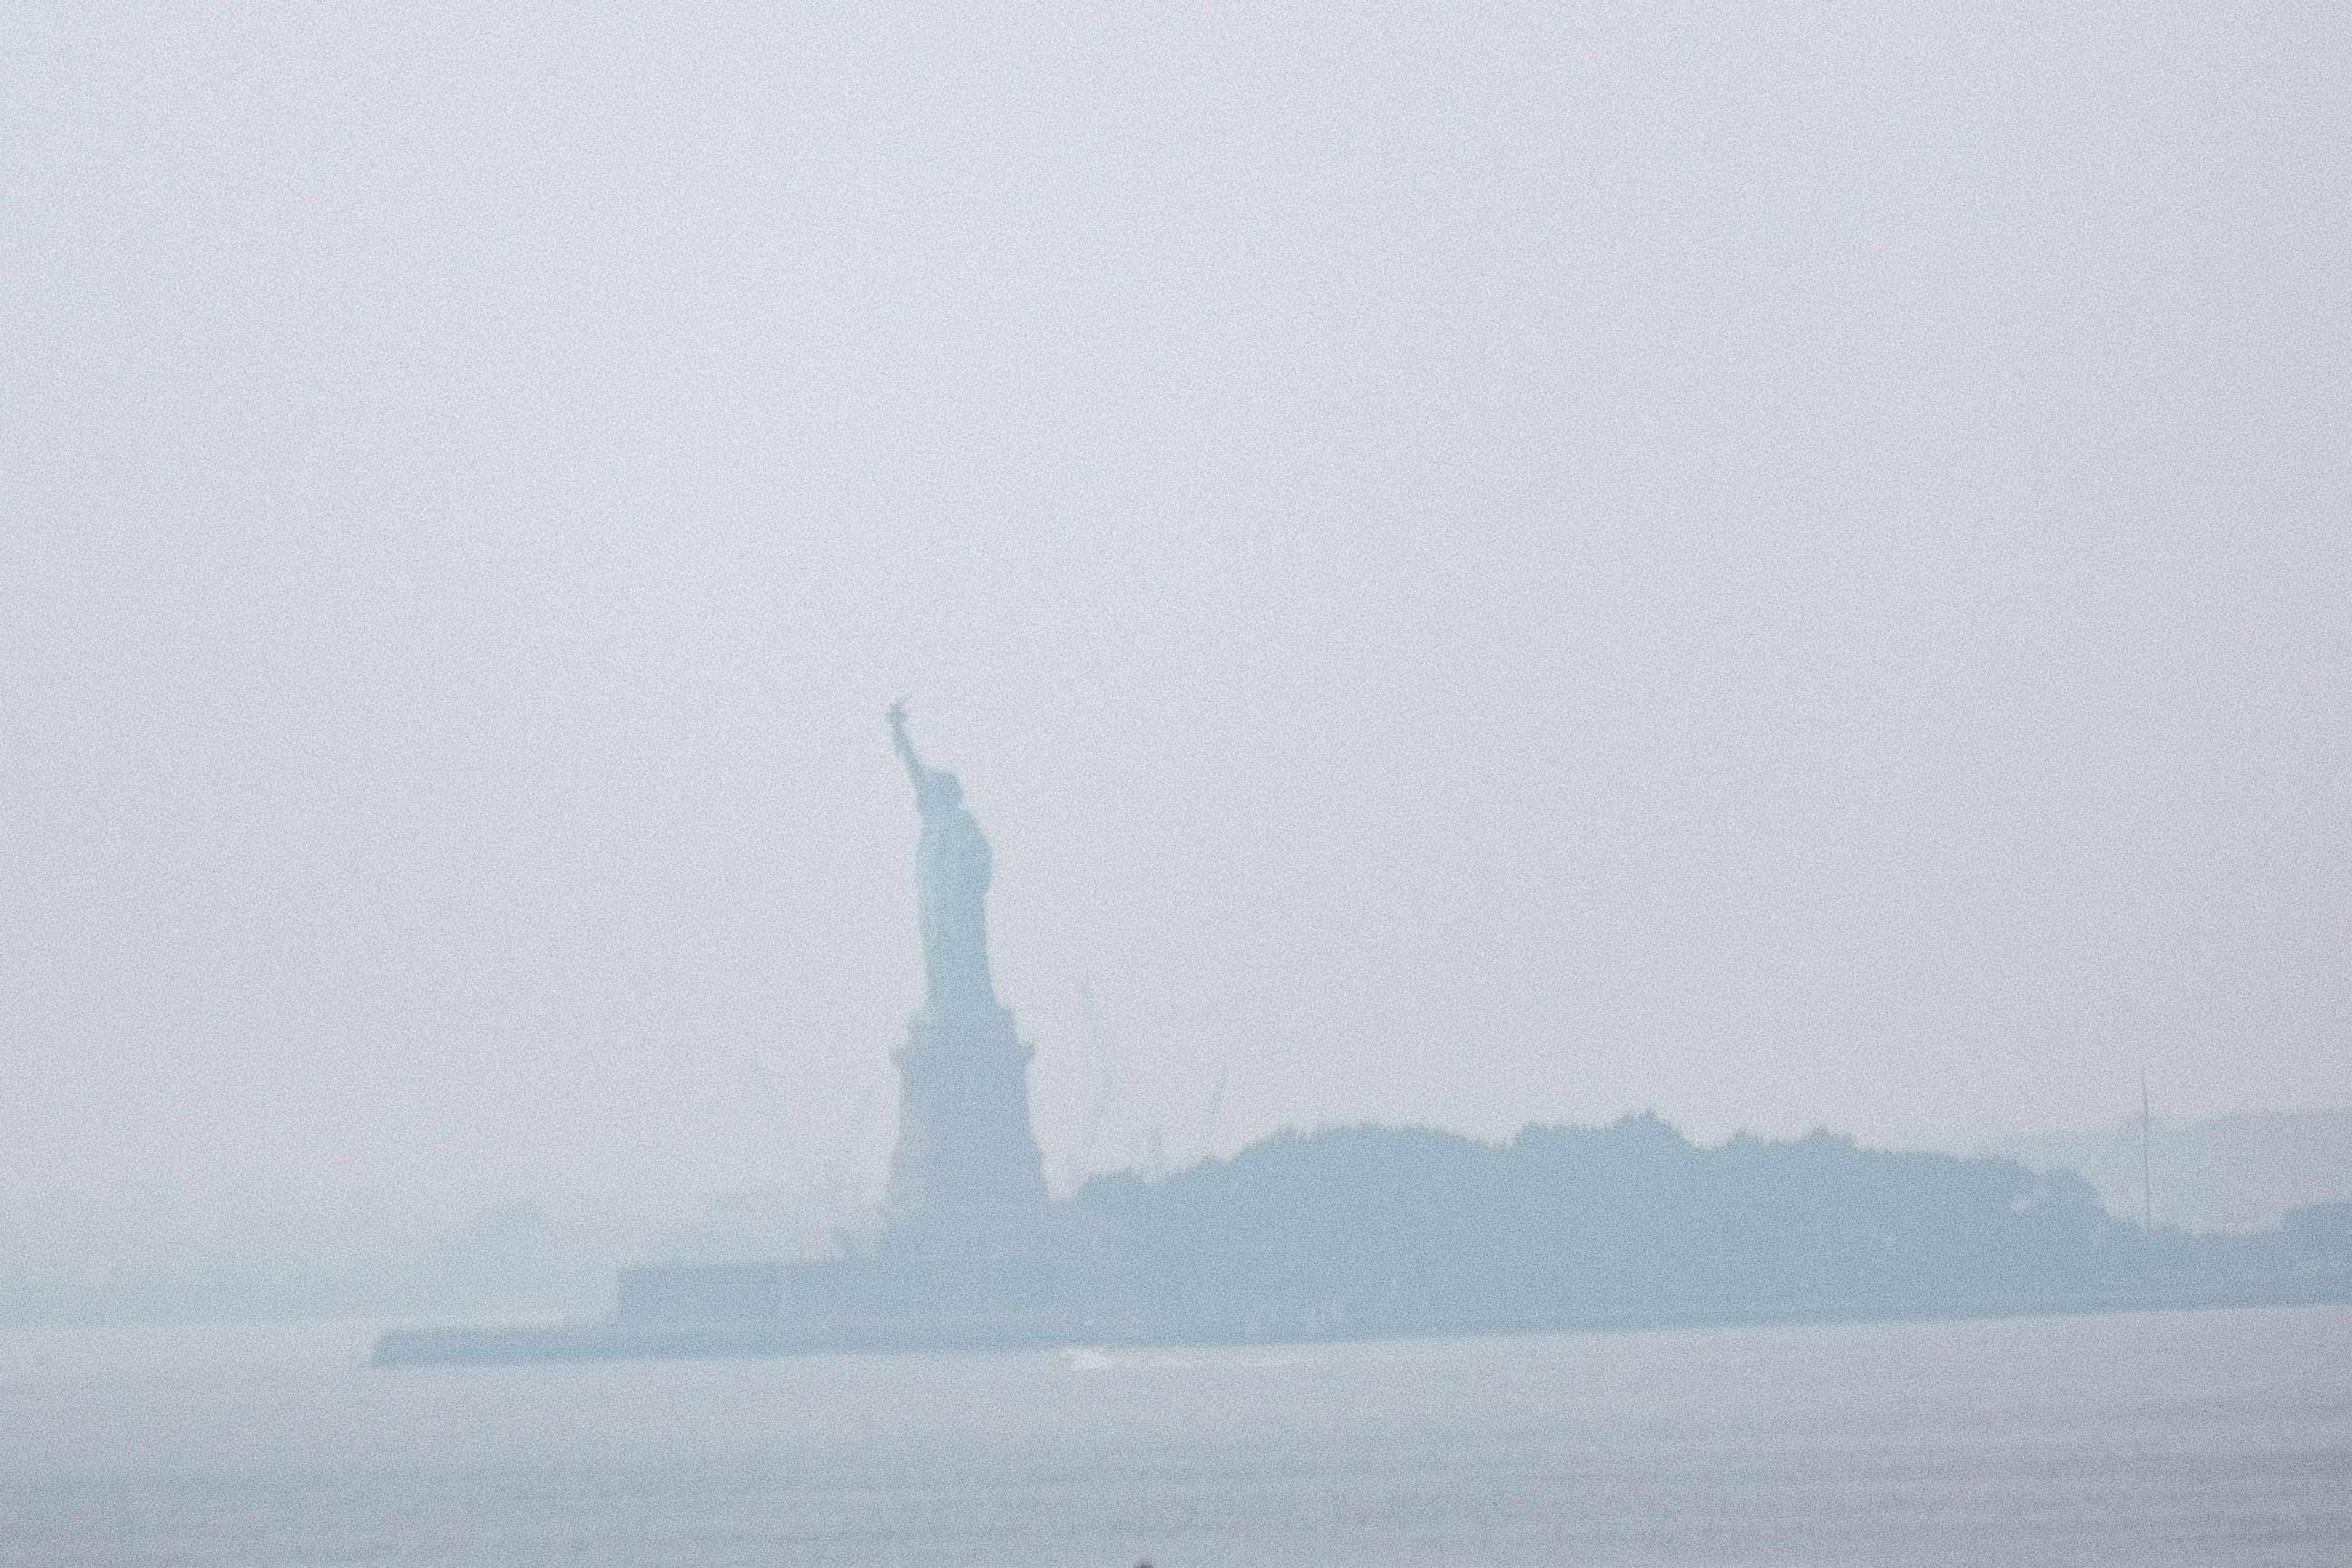 PHOTO: The Statue of Liberty sits behind a cloud of haze on July 20, 2021 in New York City.